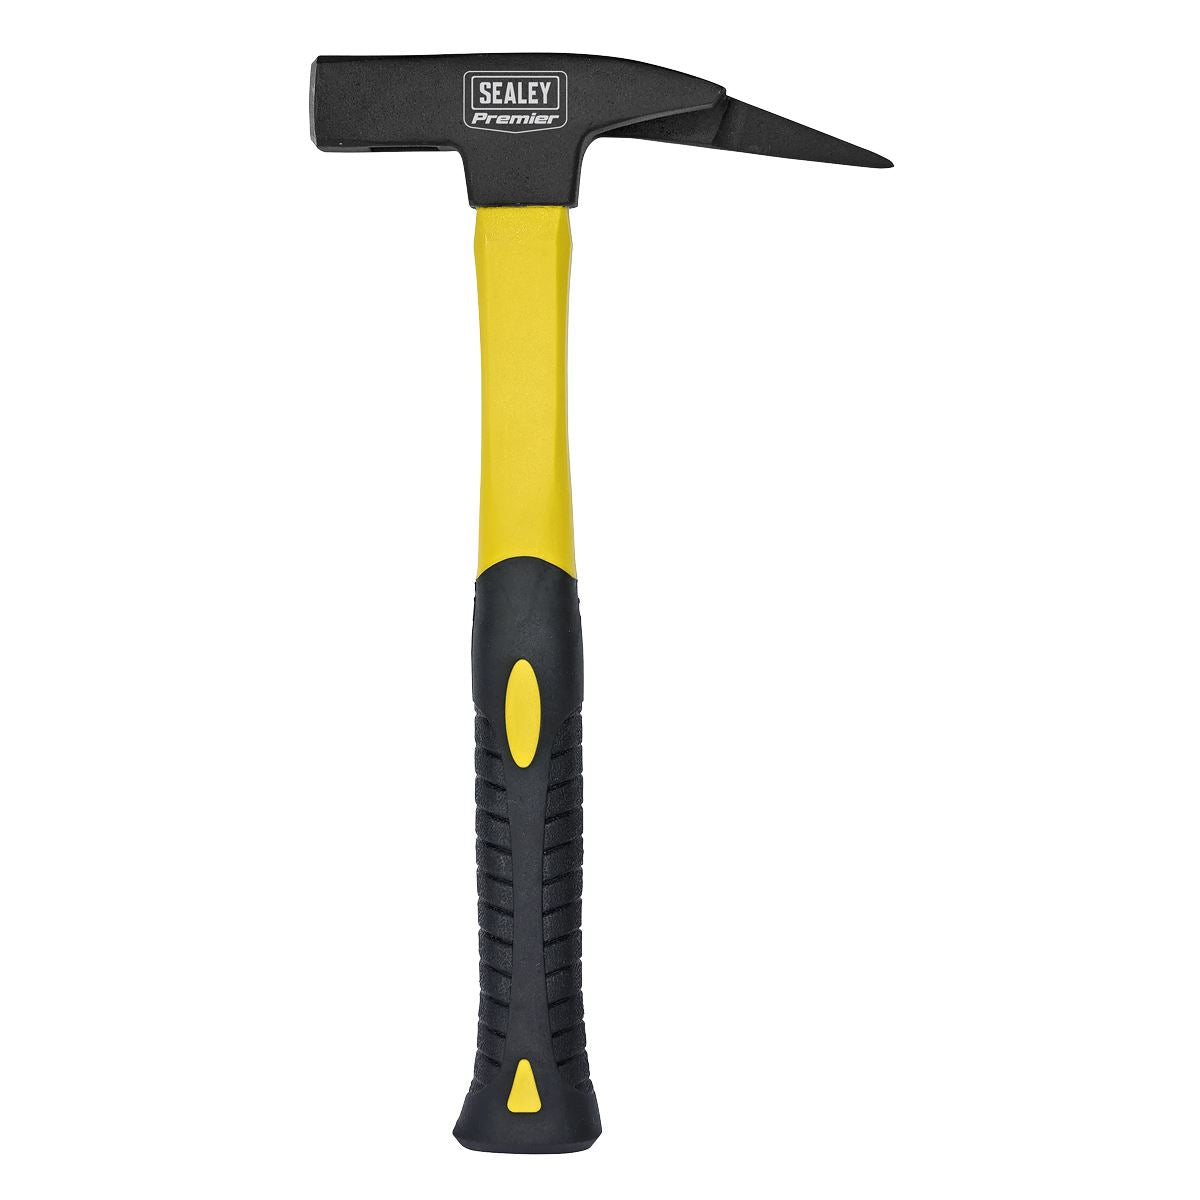 Sealey Premier Roofing Hammer with Fibreglass Handle 600g